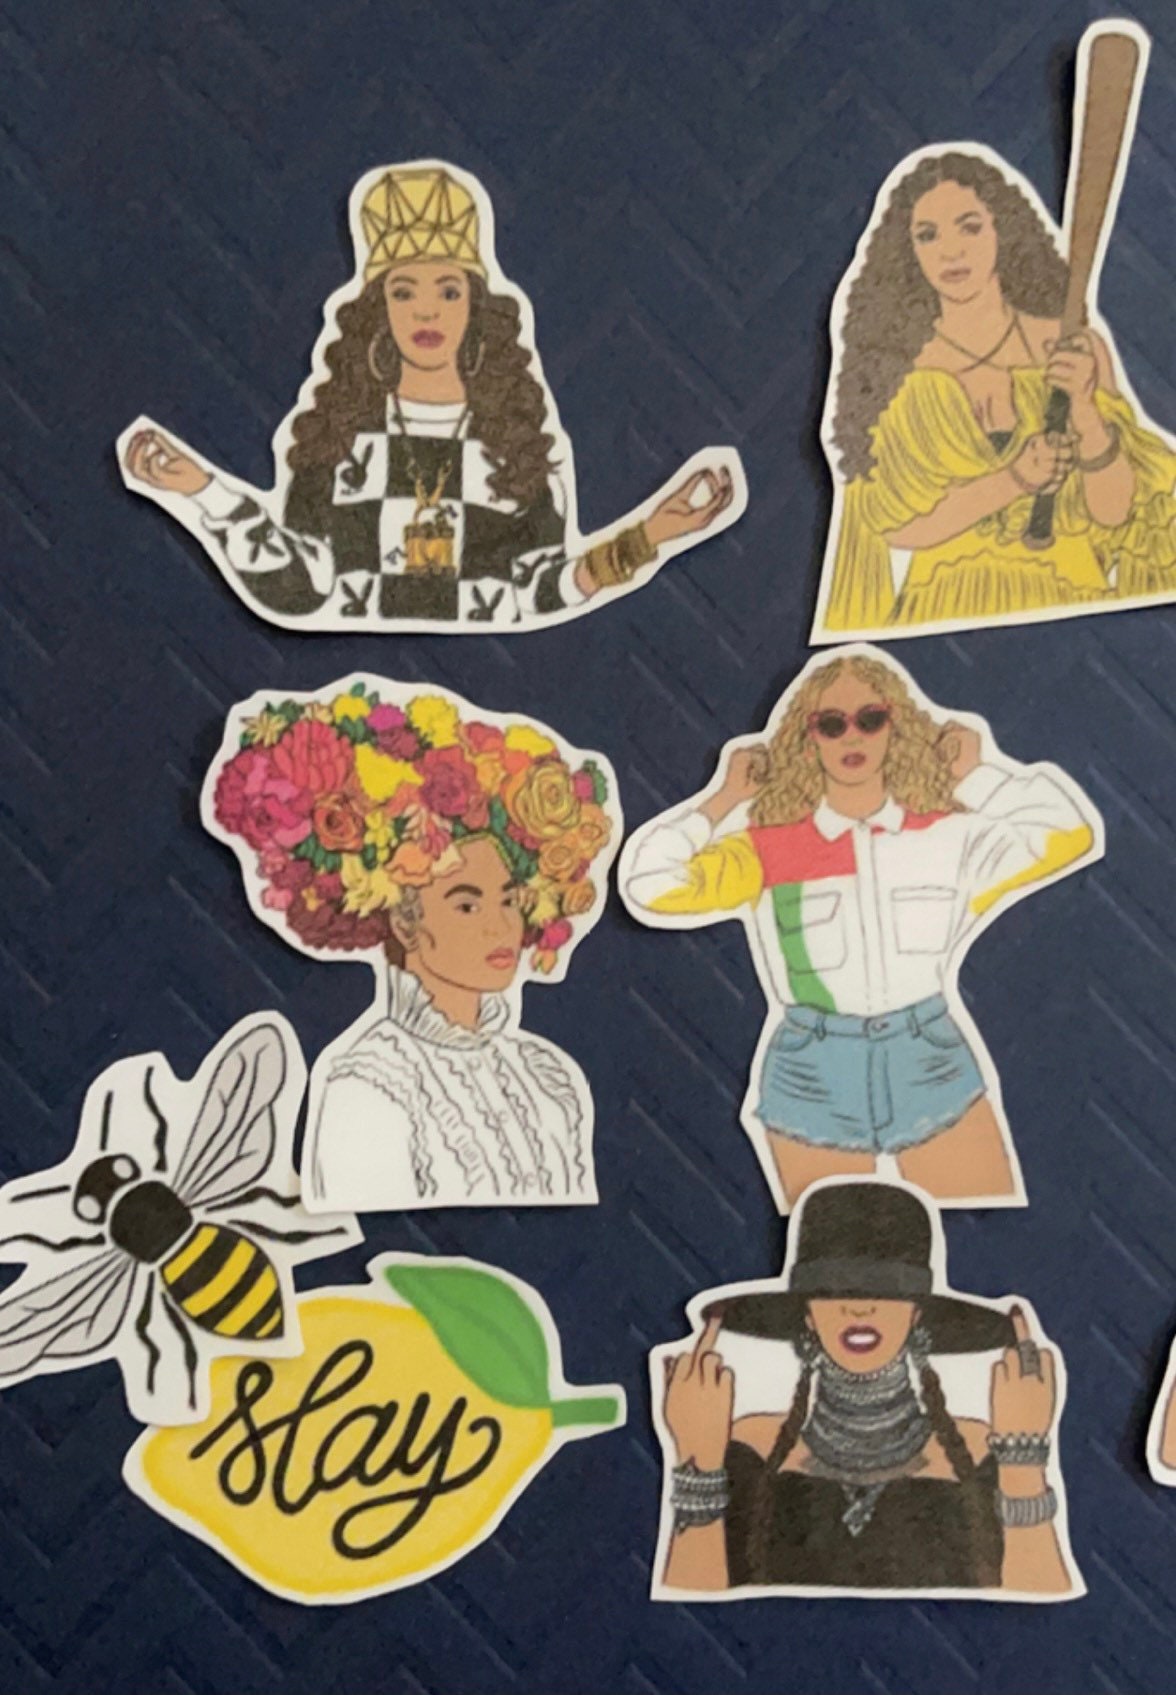 Beyonce Stickers for Sale  Beyonce stickers, Bee sticker, Cool stickers